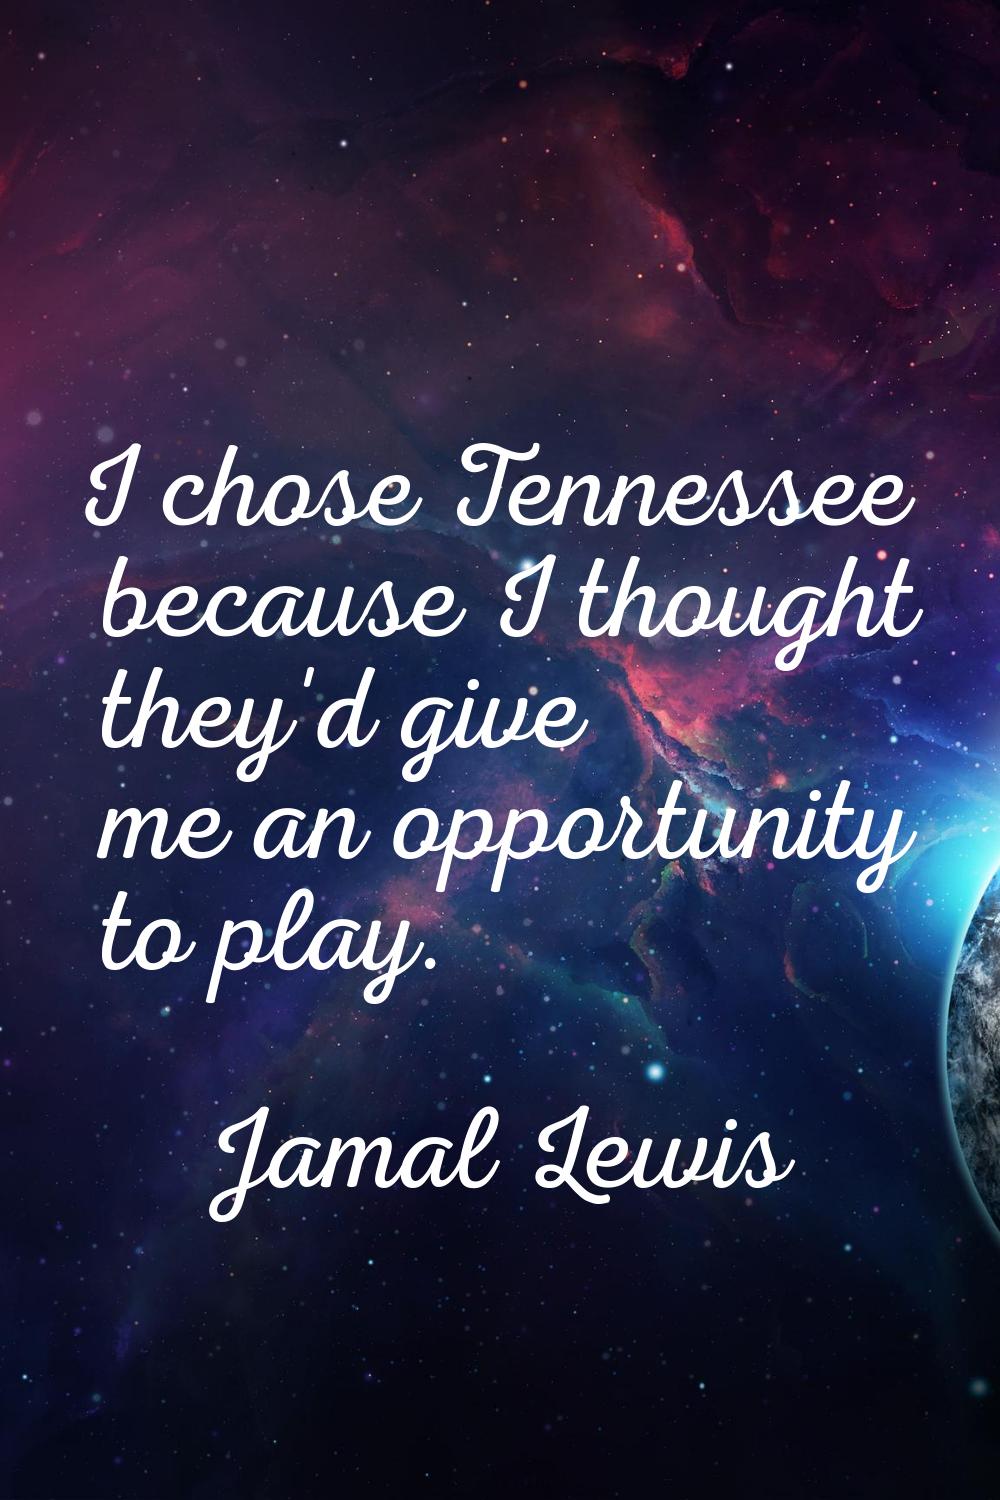 I chose Tennessee because I thought they'd give me an opportunity to play.